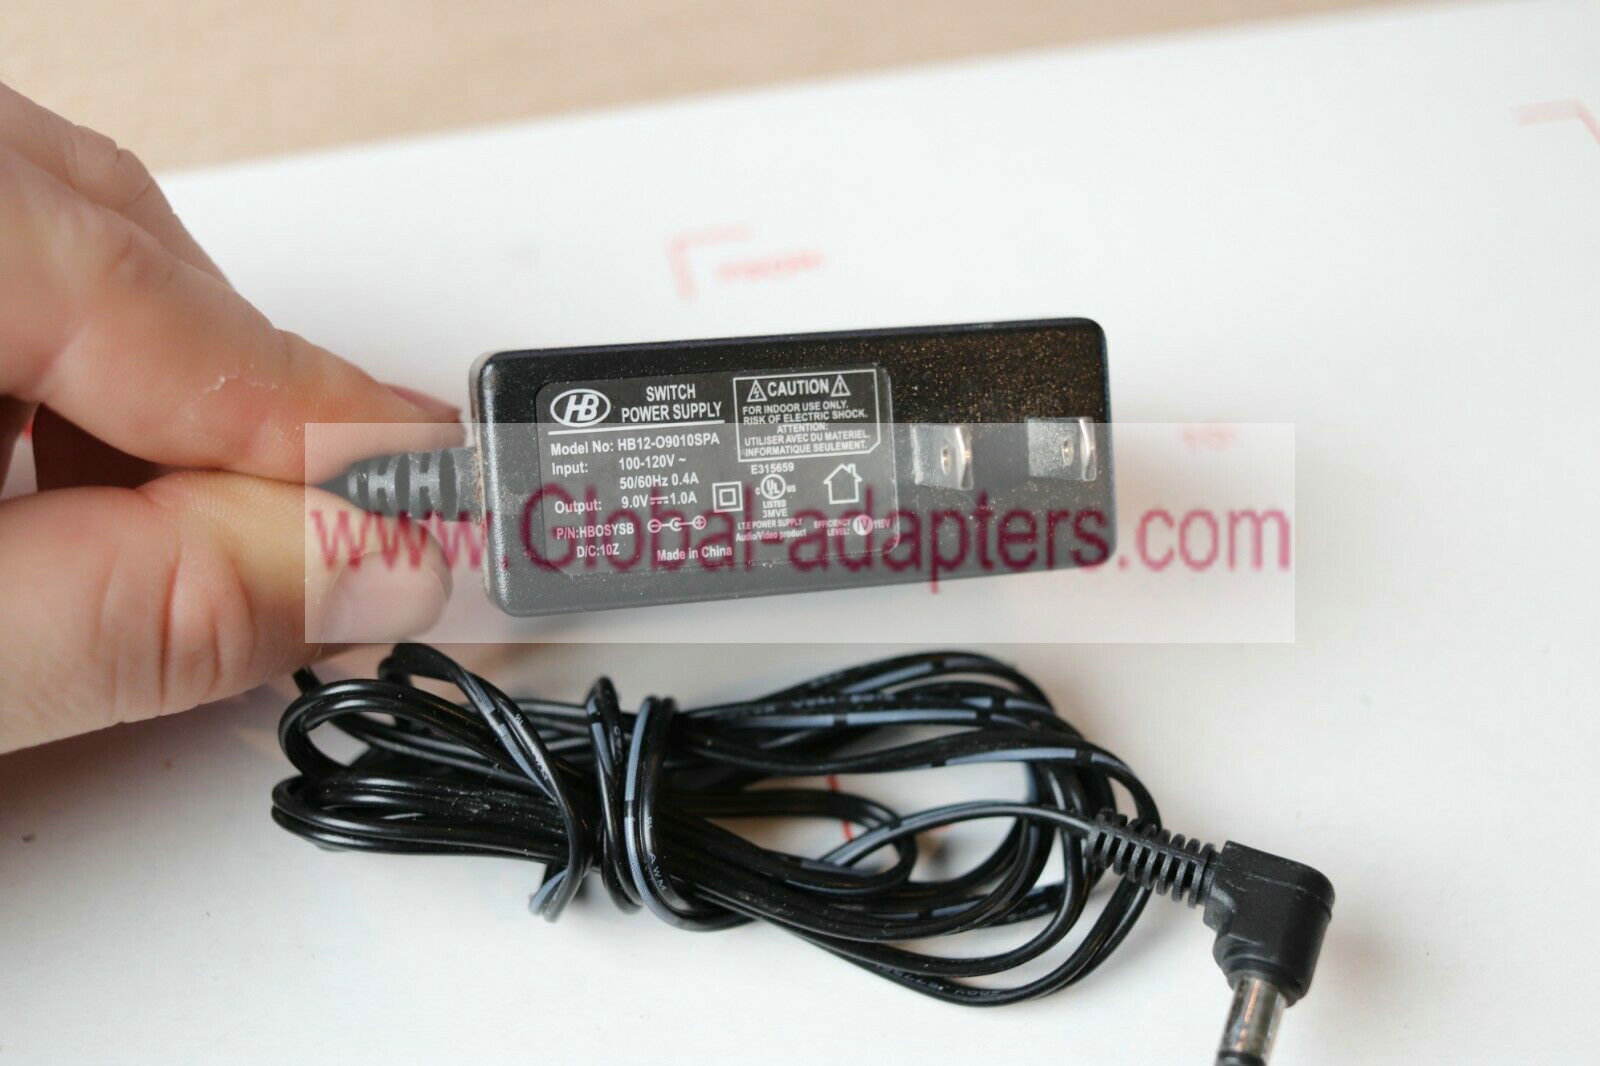 New HB HB12-09010SPA 9V 1A Switch Power Supply Charger - Click Image to Close